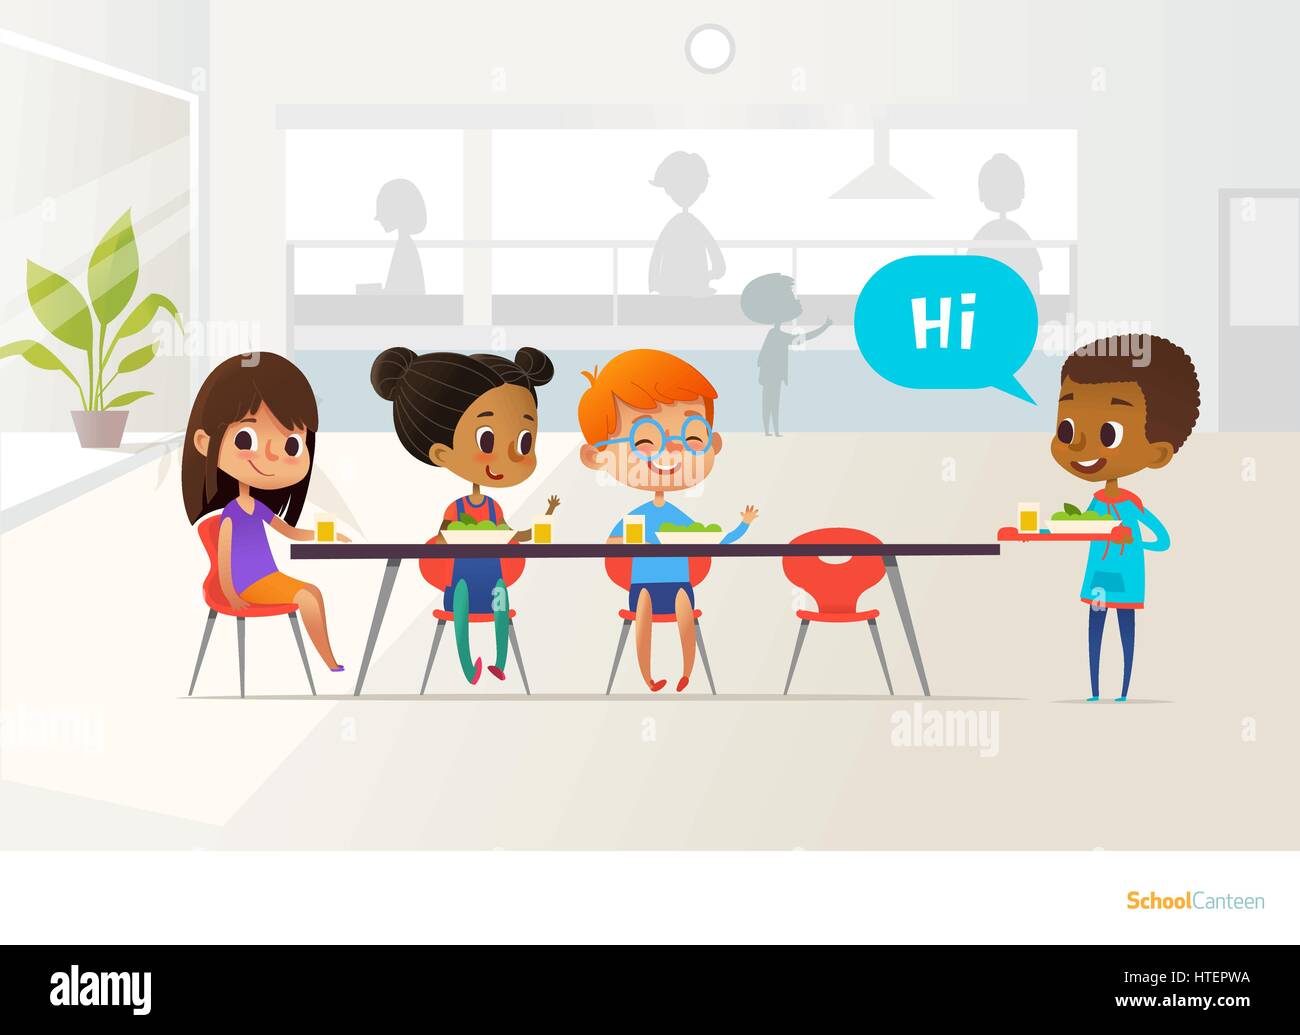 New pupil carrying tray of food and greeting classmates sitting at table in canteen. Children having lunch. Making school friends concept. Vector illustration for banner, website, poster, flyer. Stock Vector